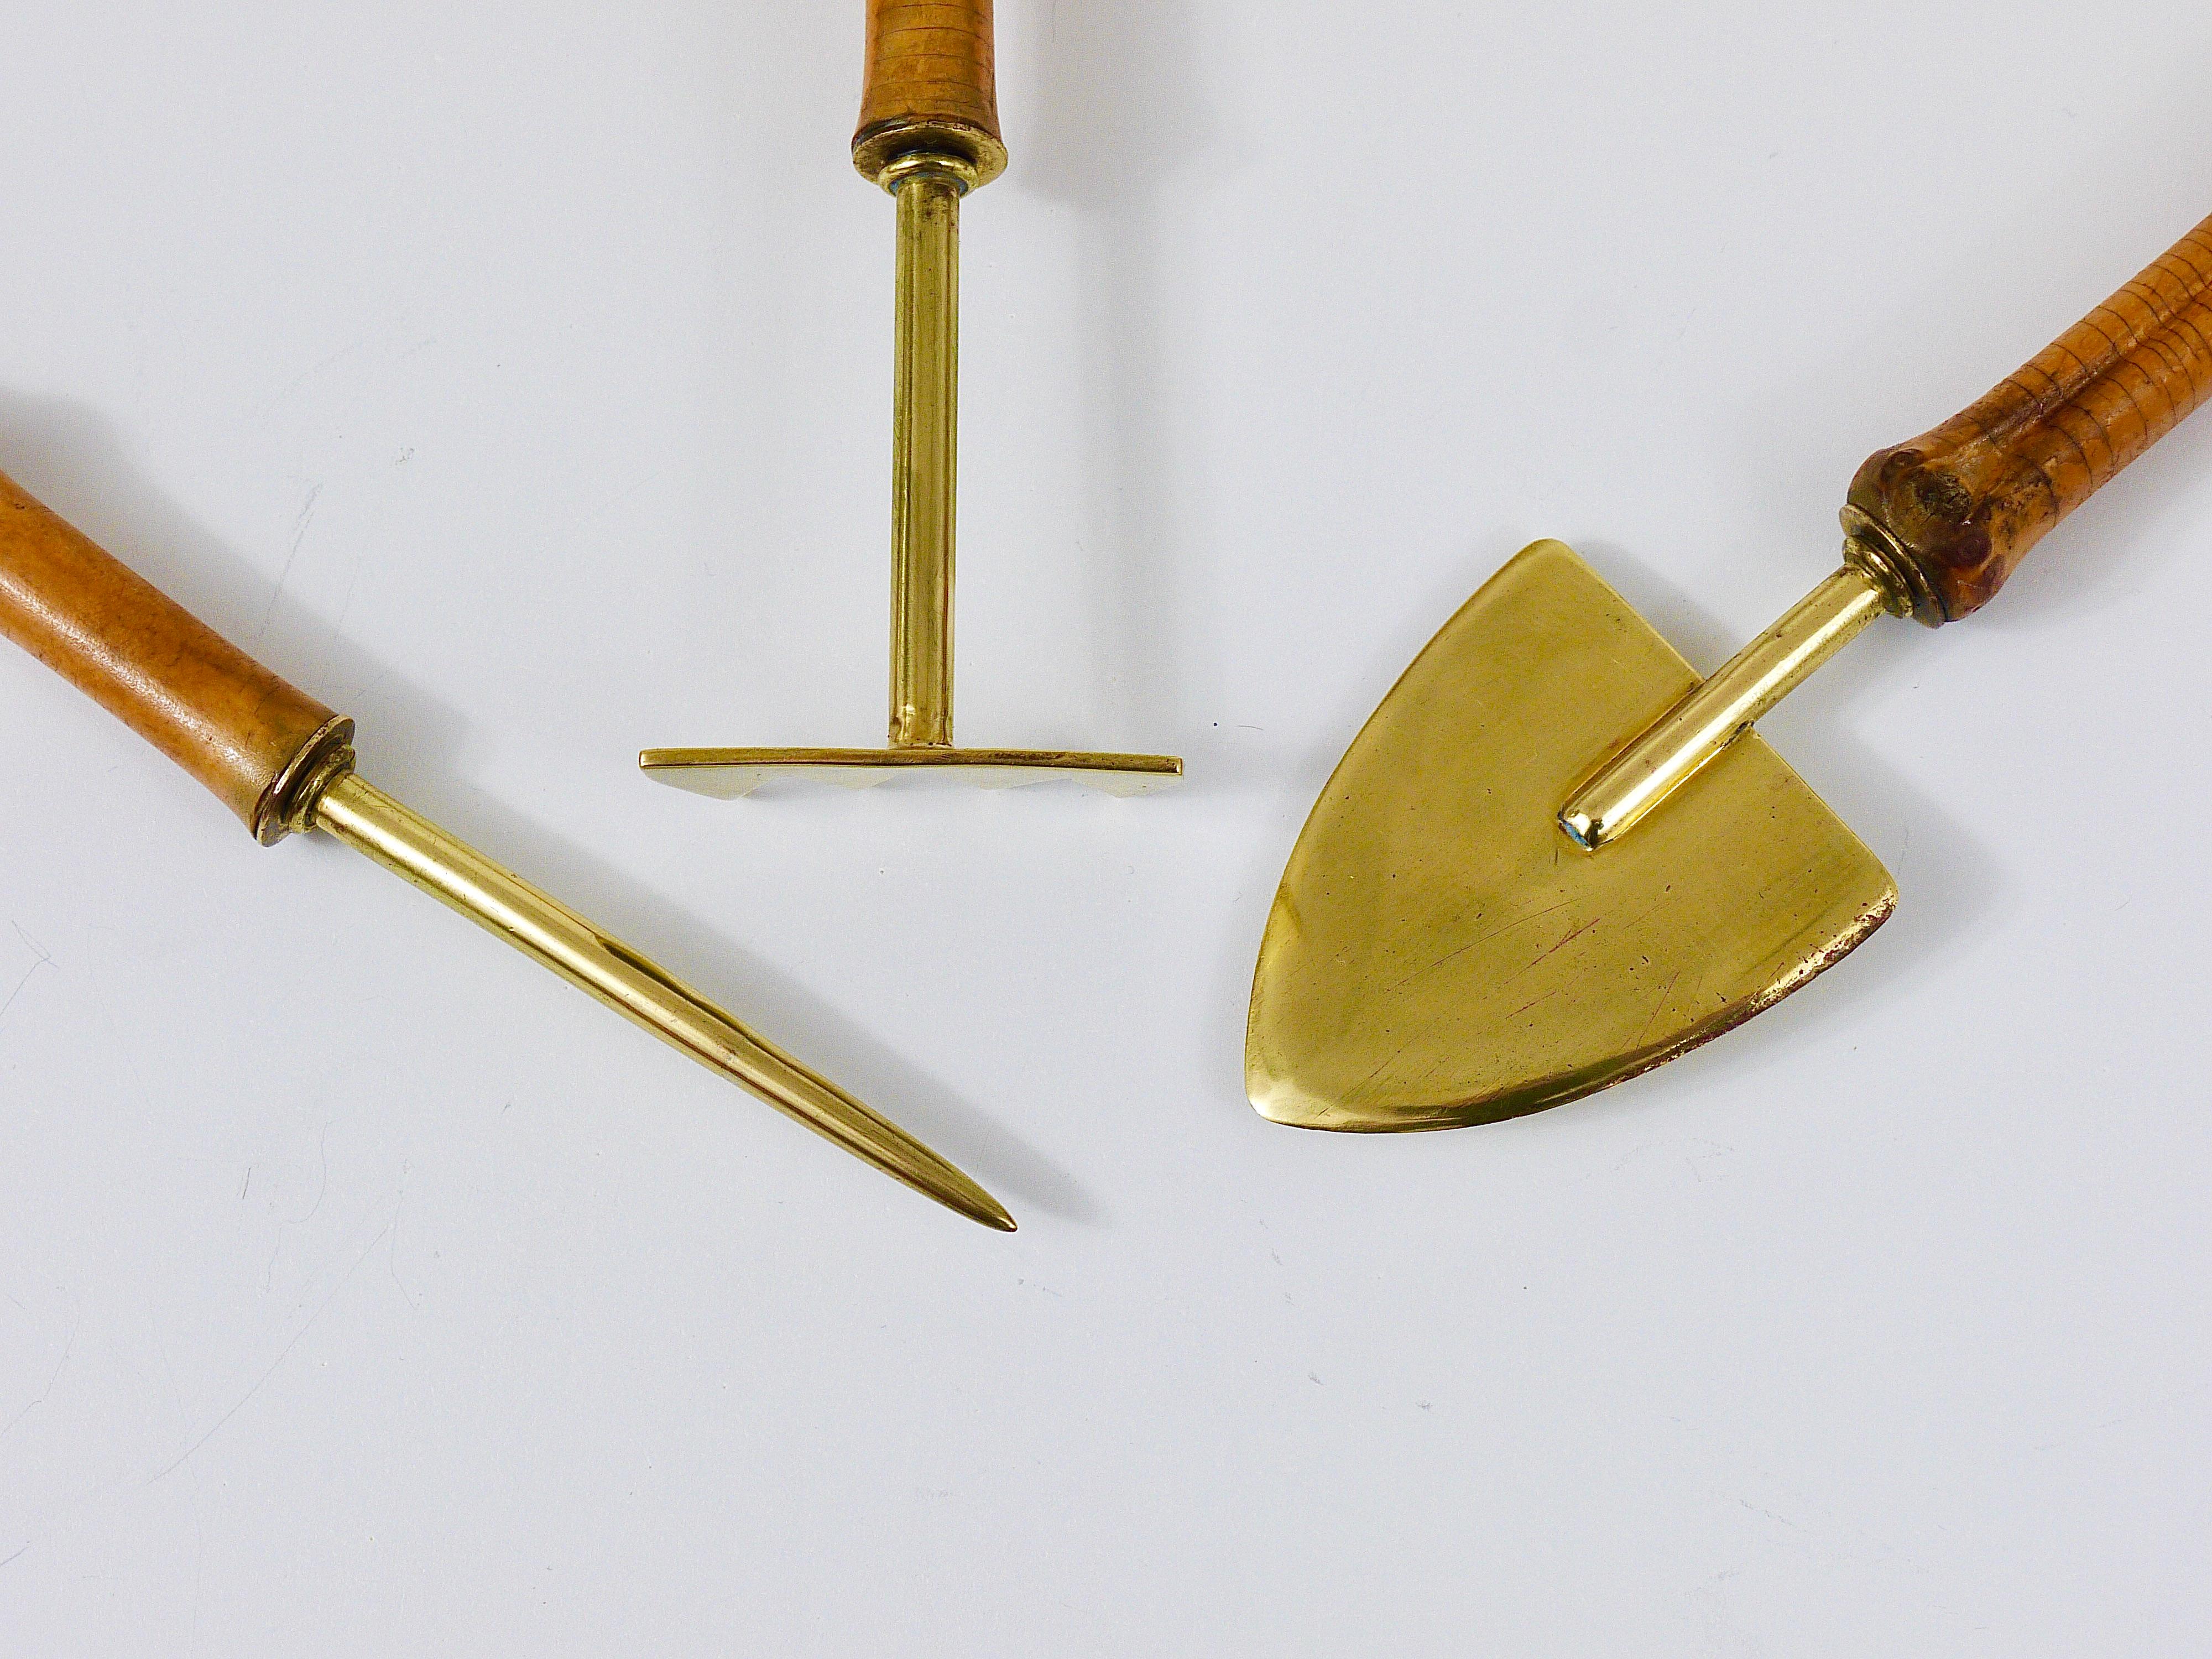 A beautiful set of gardening tools, made brass and bamboo. Consists of a rake, a shovel and a skewer. Handmade in the 1950s in Austria. To be used for cacti and other indoor plants and also a decorative addition to your plants and flower pots. In